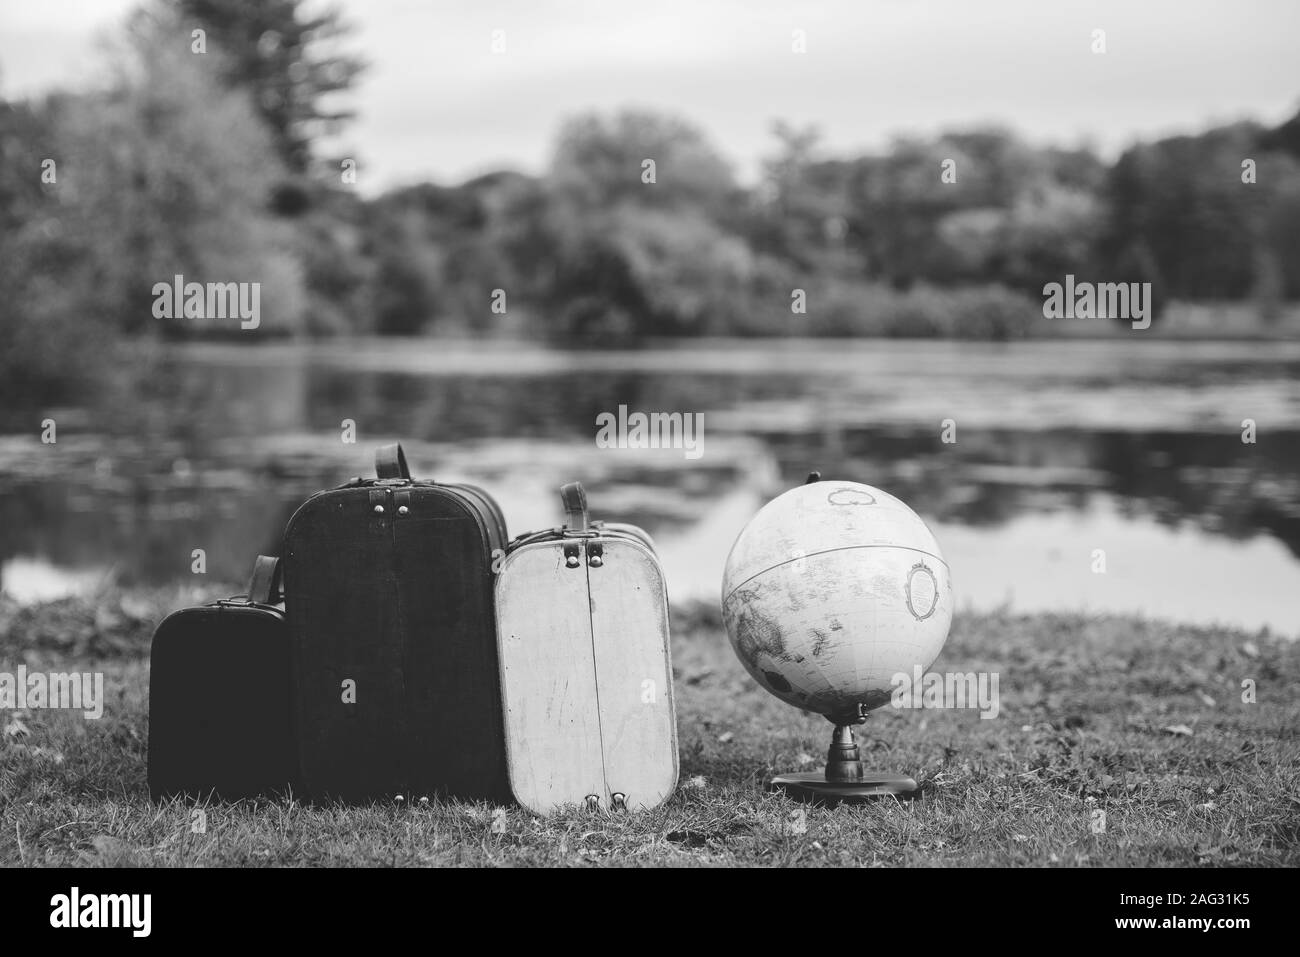 Closeup shot of old suitcases near a desk globe in a grassy field with a blurred background Stock Photo